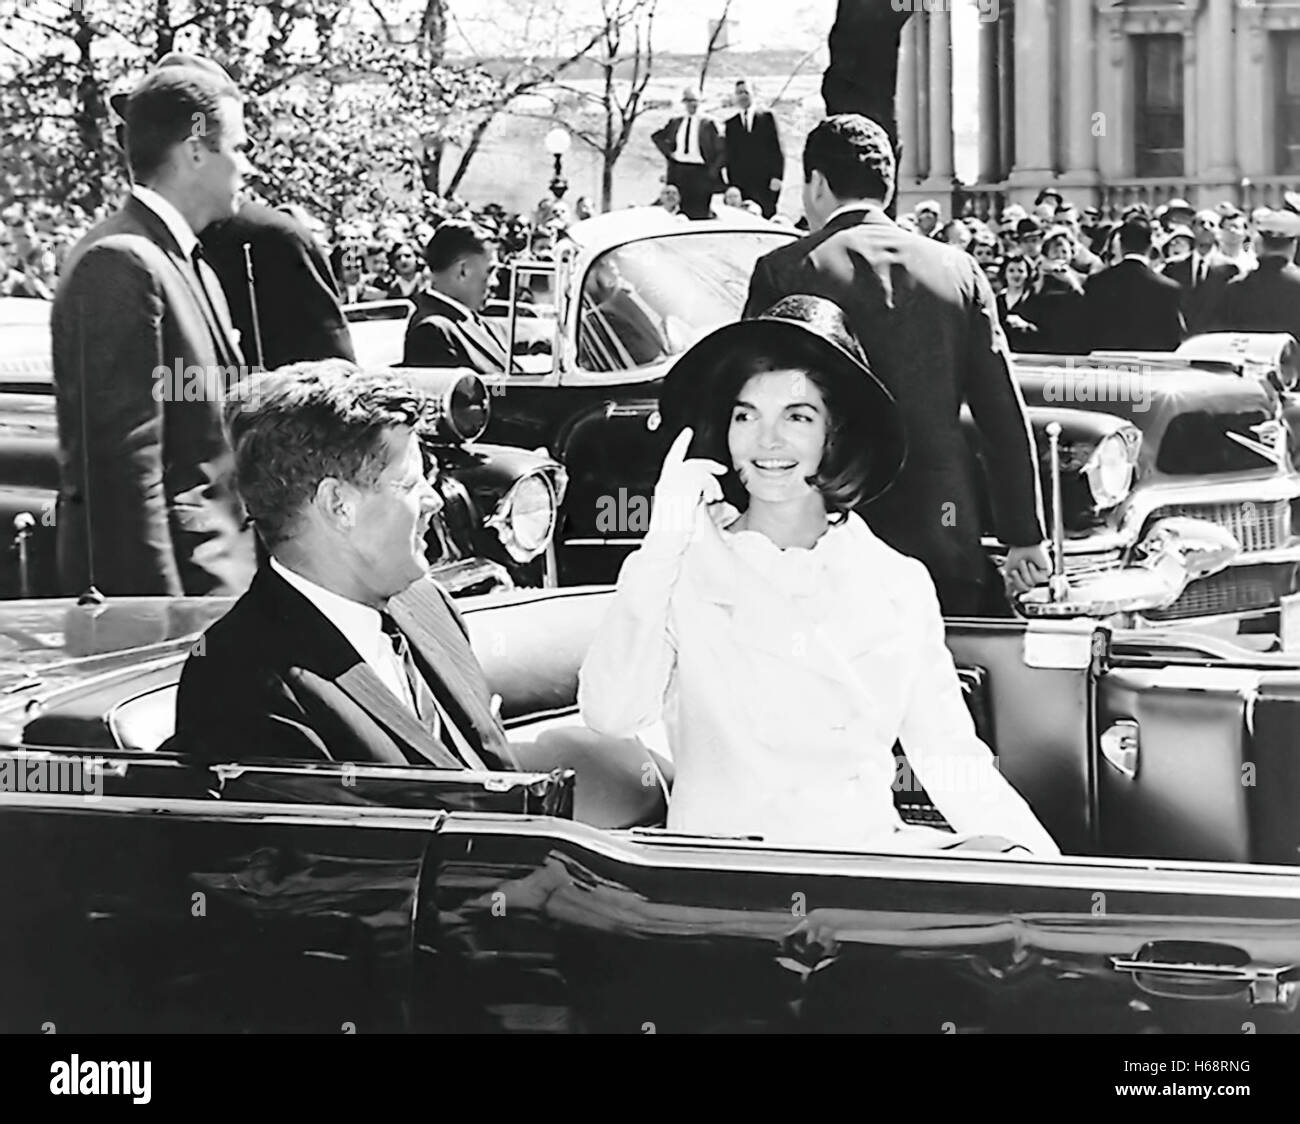 President John F. Kennedy and Jacqueline Kennedy in open top presidential limousine leaving the White House. Stock Photo